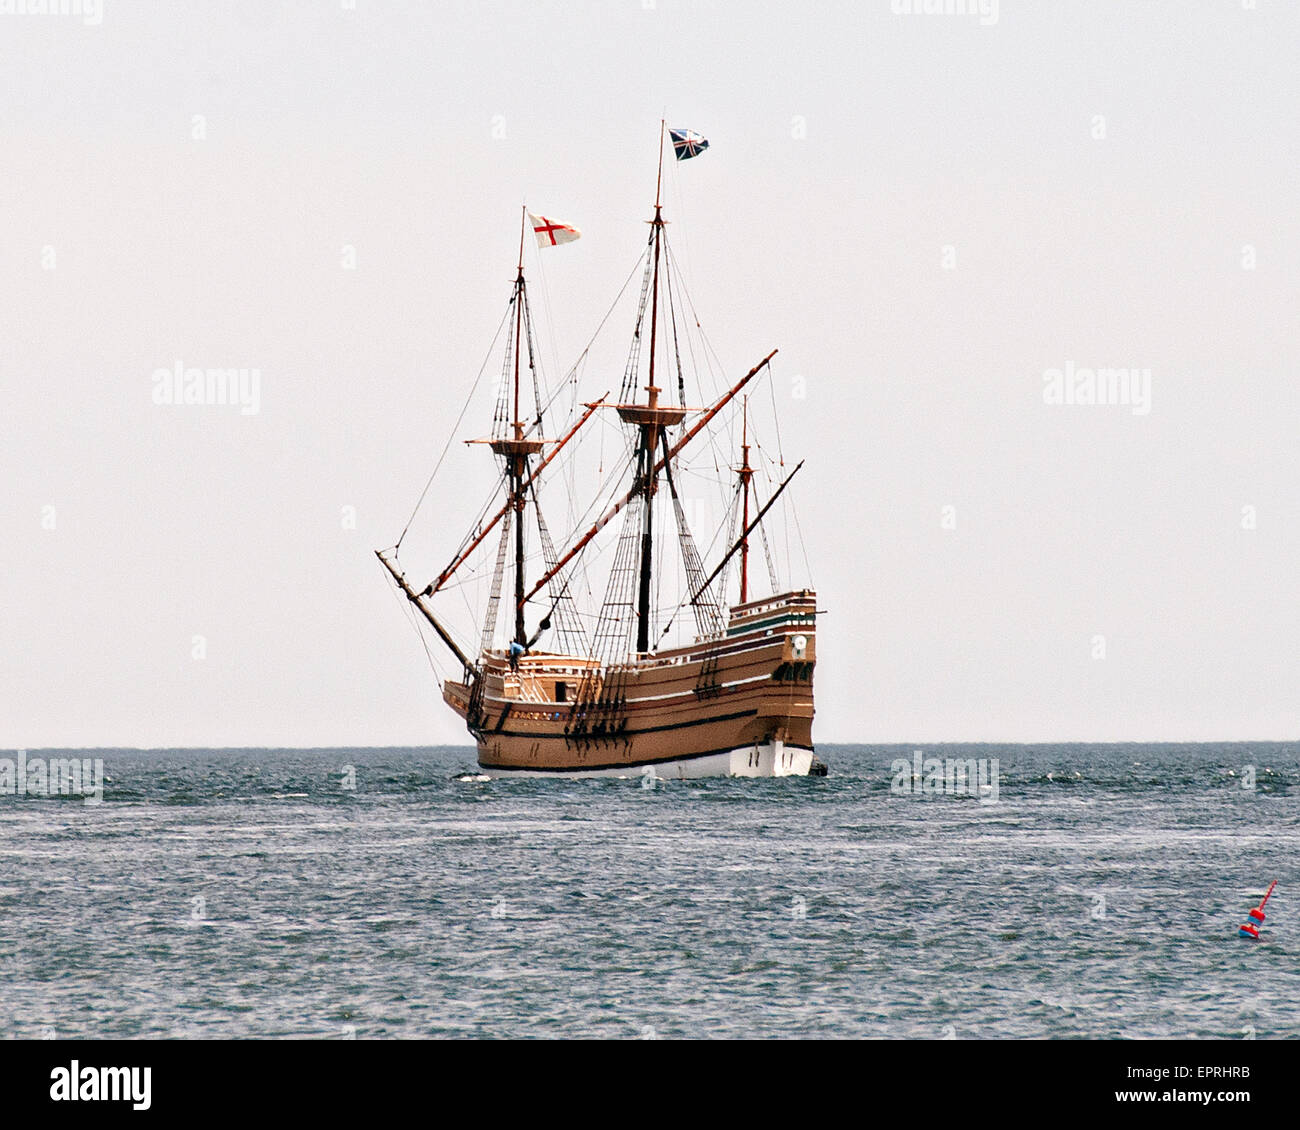 The Mayflower II, a replica of the original pilgrim ship Mayflower departs Buzzards Bay as it heads back to homeport in Plymouth after renovations May 20, 2015 in Buzzards Bay, Massachusetts. The Mayflower II first launched in 1957 and has been undergoing renovations at Mystic Seaport in Connecticut since December. Stock Photo